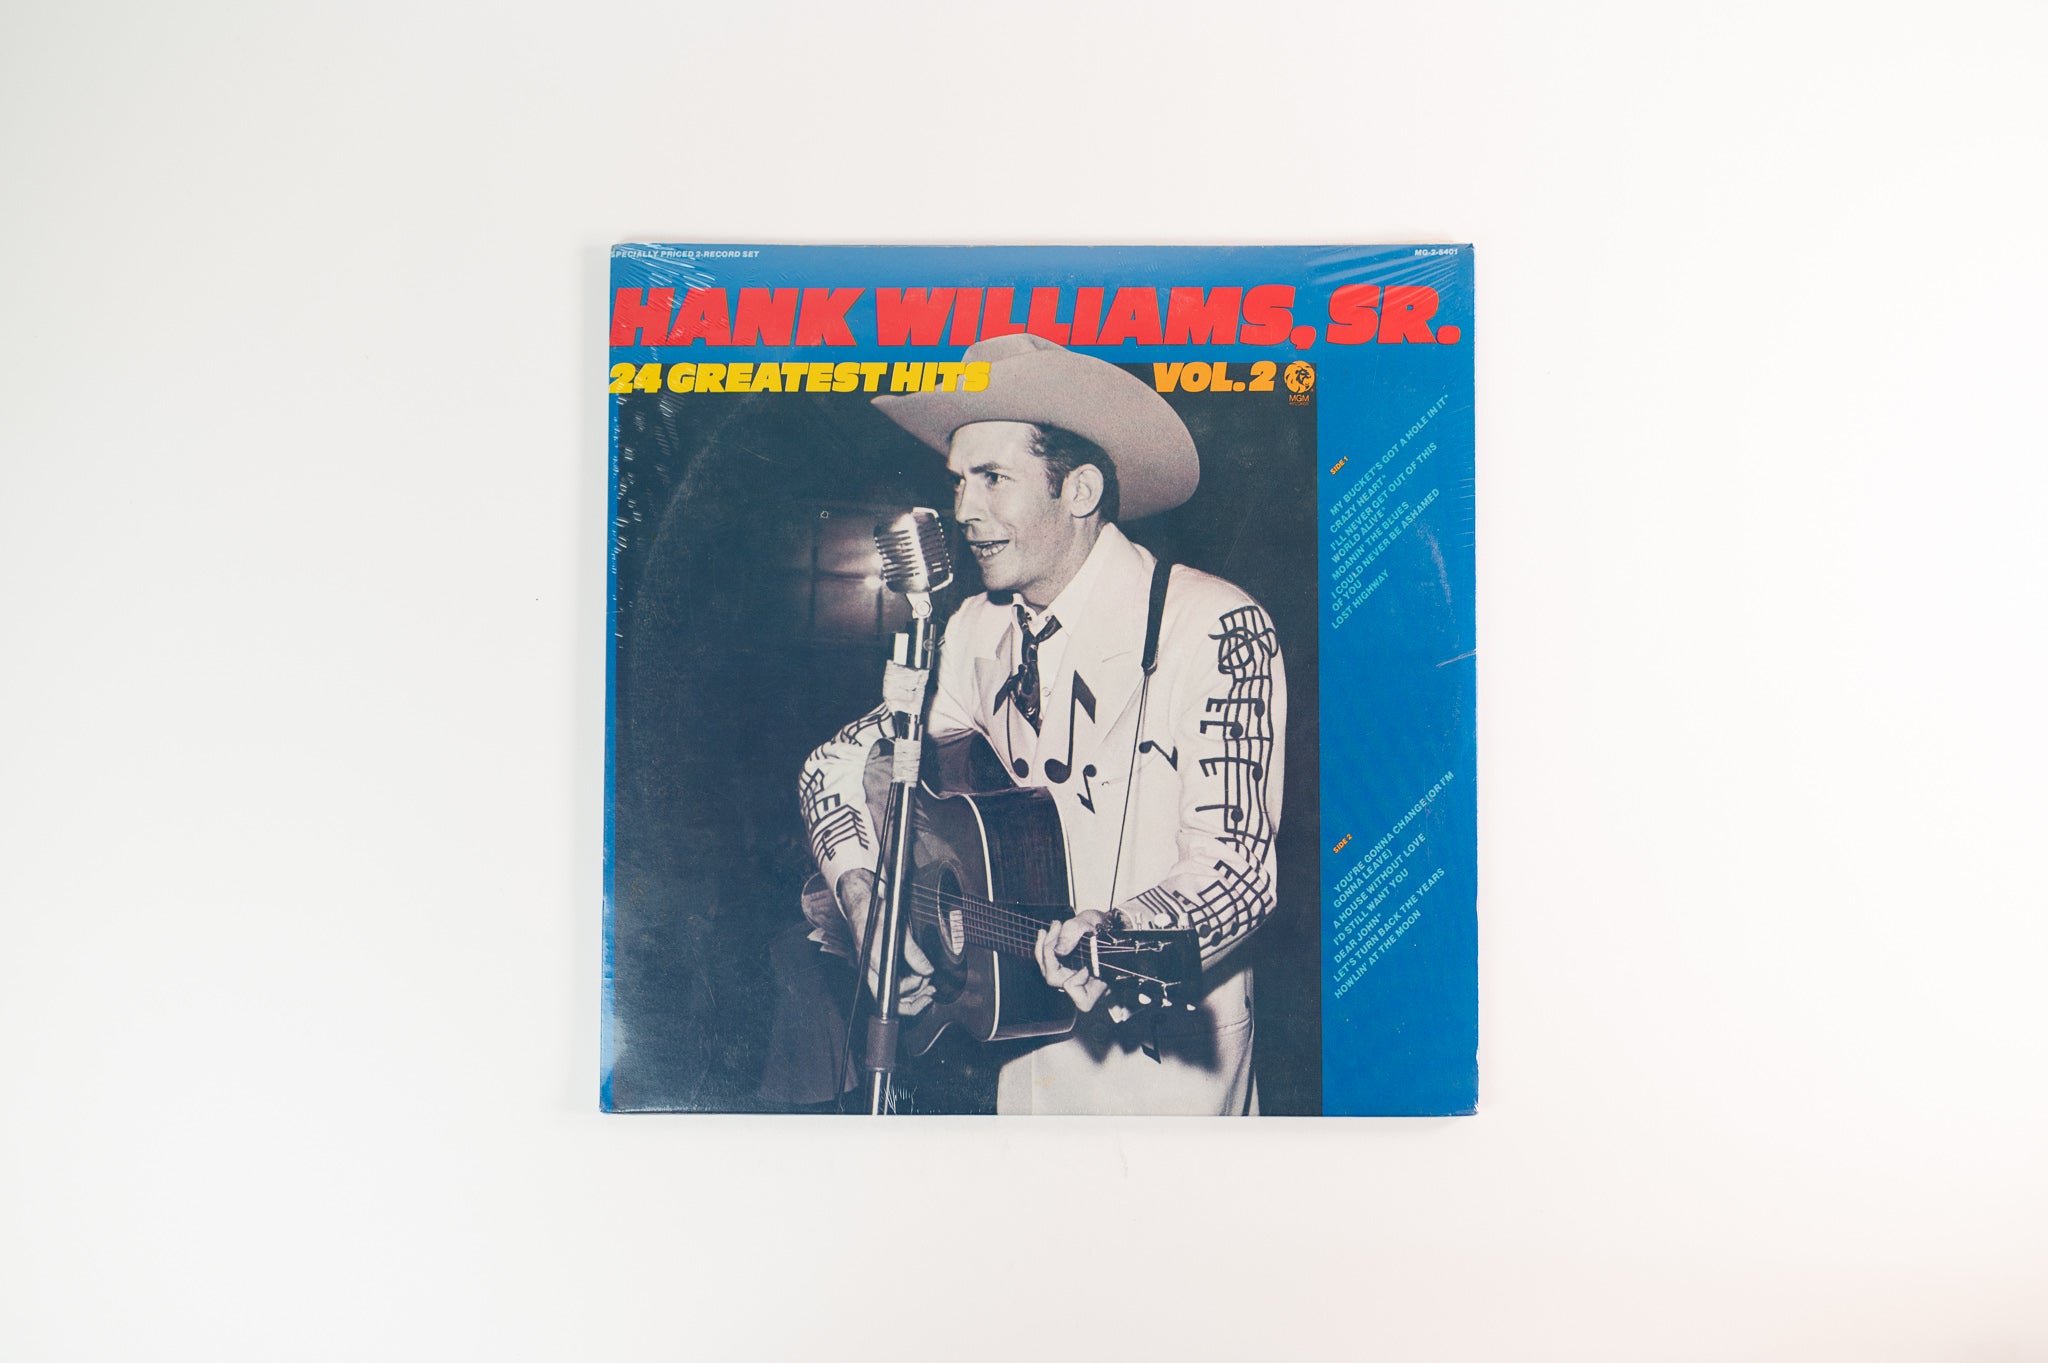 Hank Williams - 24 Greatest Hits Vol. 2 on MGM Records - Sealed